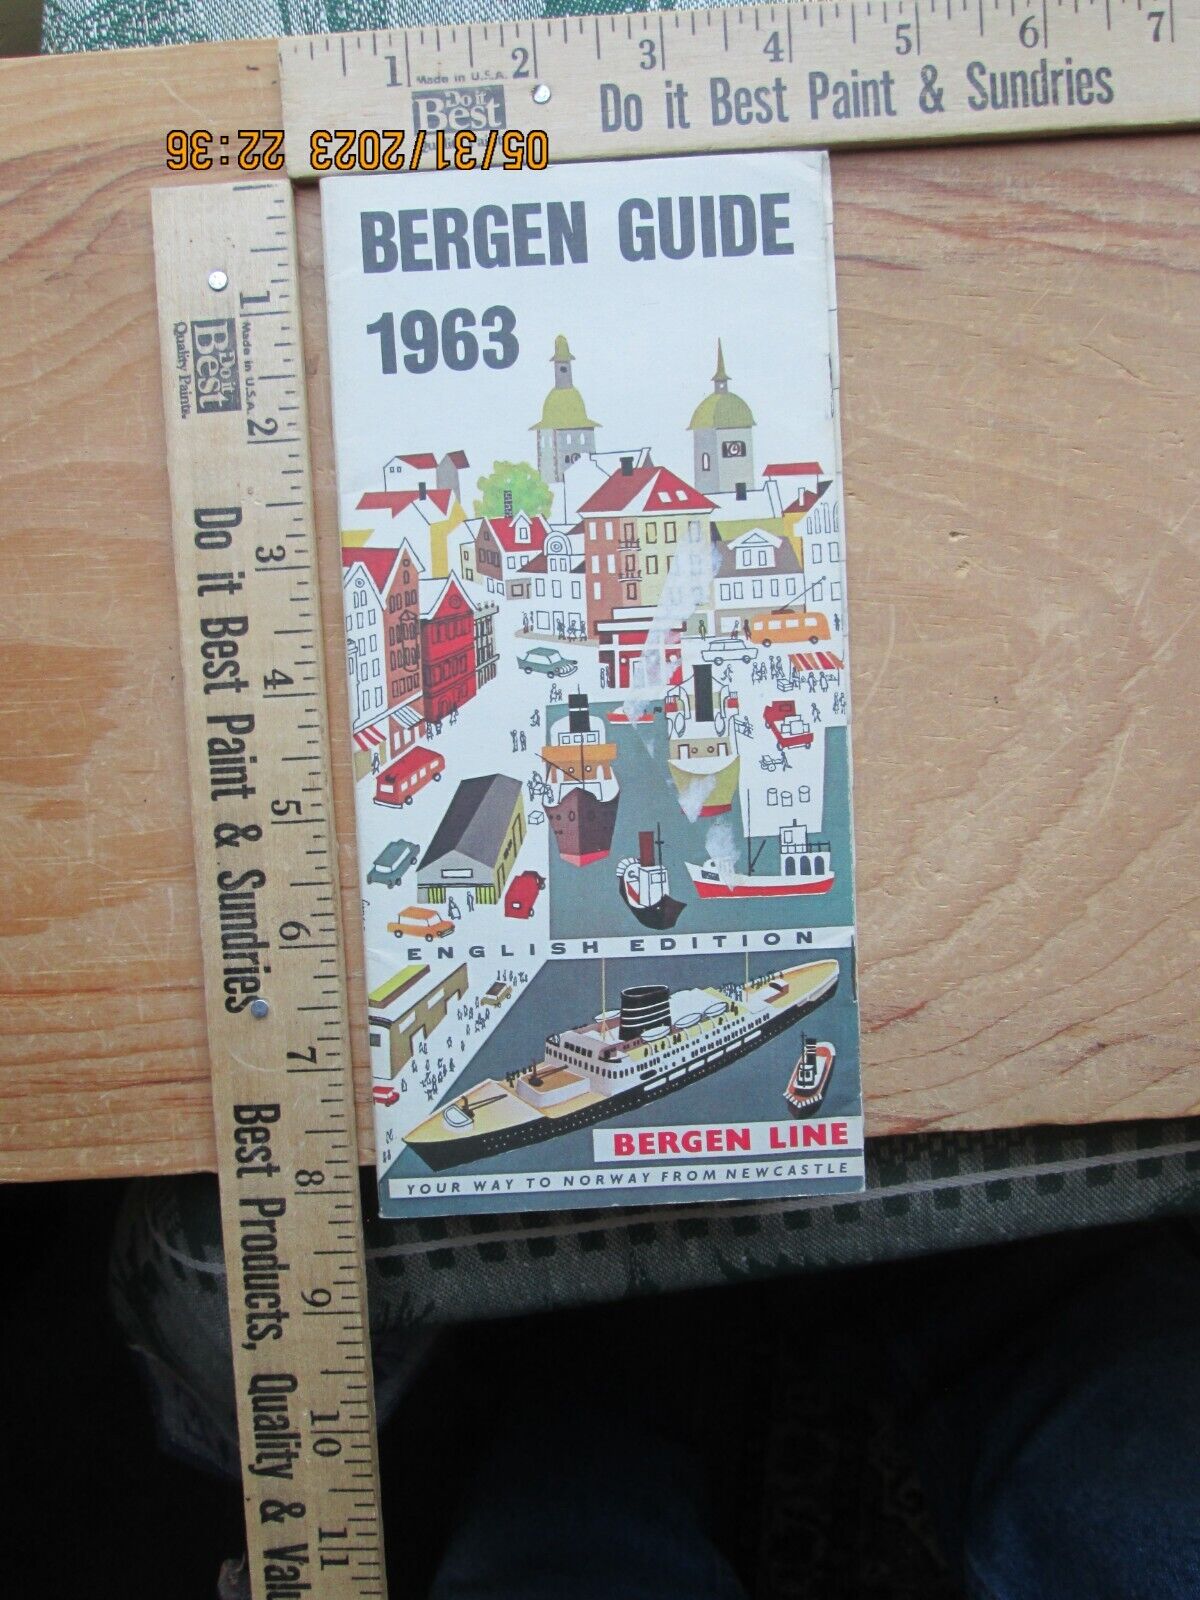 bergen guide1963 bergen line your way to Norway from Newcastle